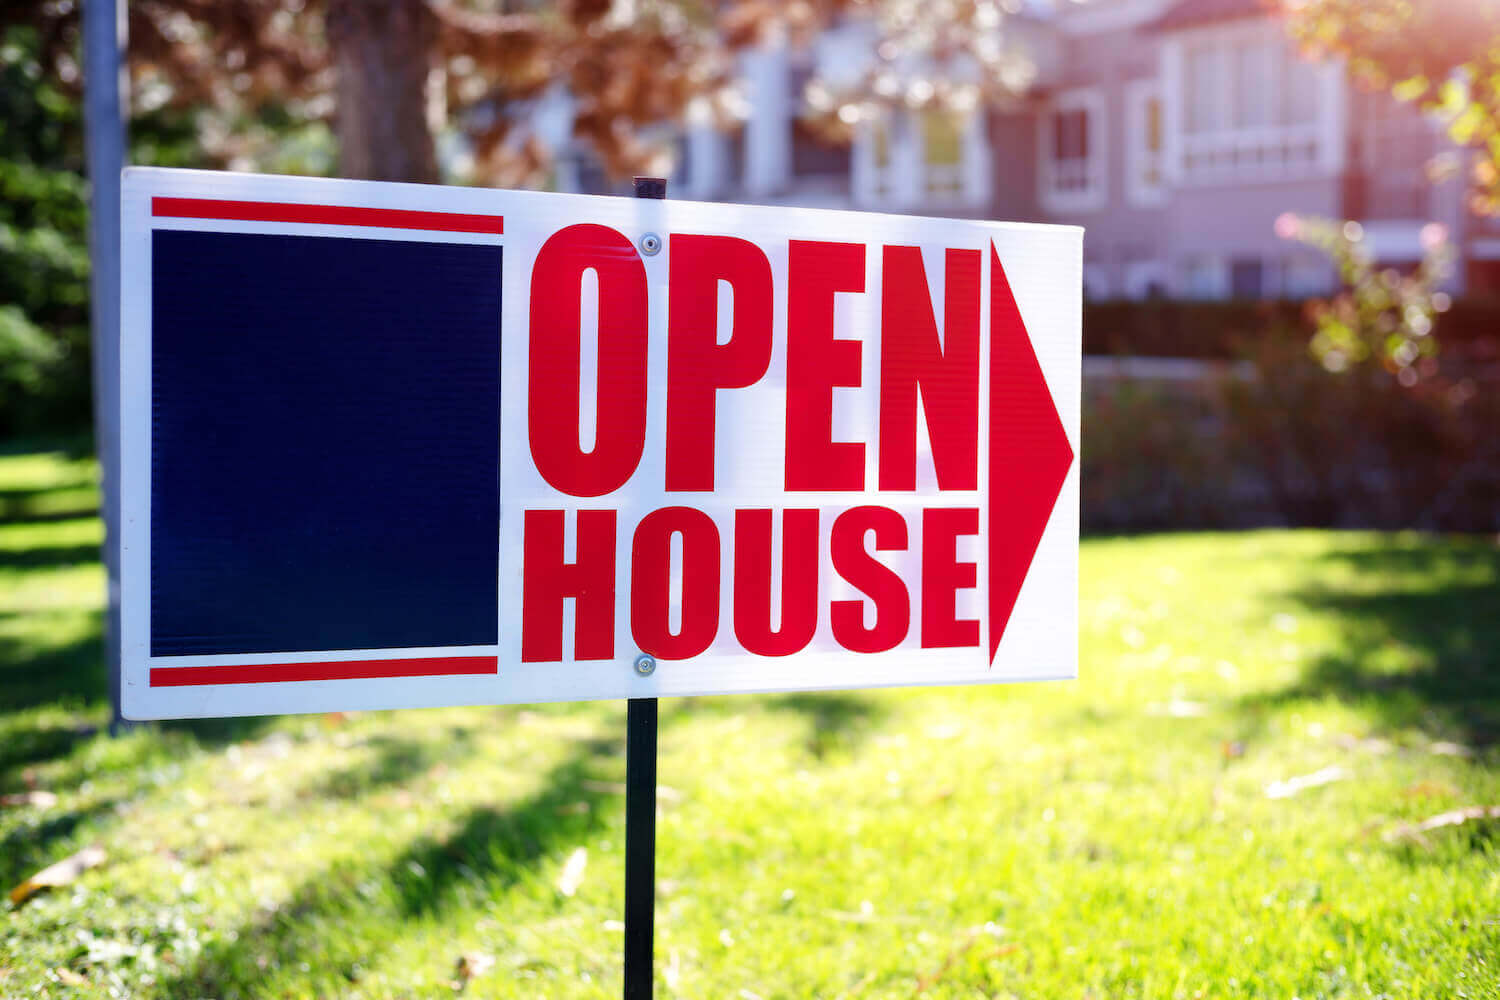 12 open house ideas for real estate agents that generate leads